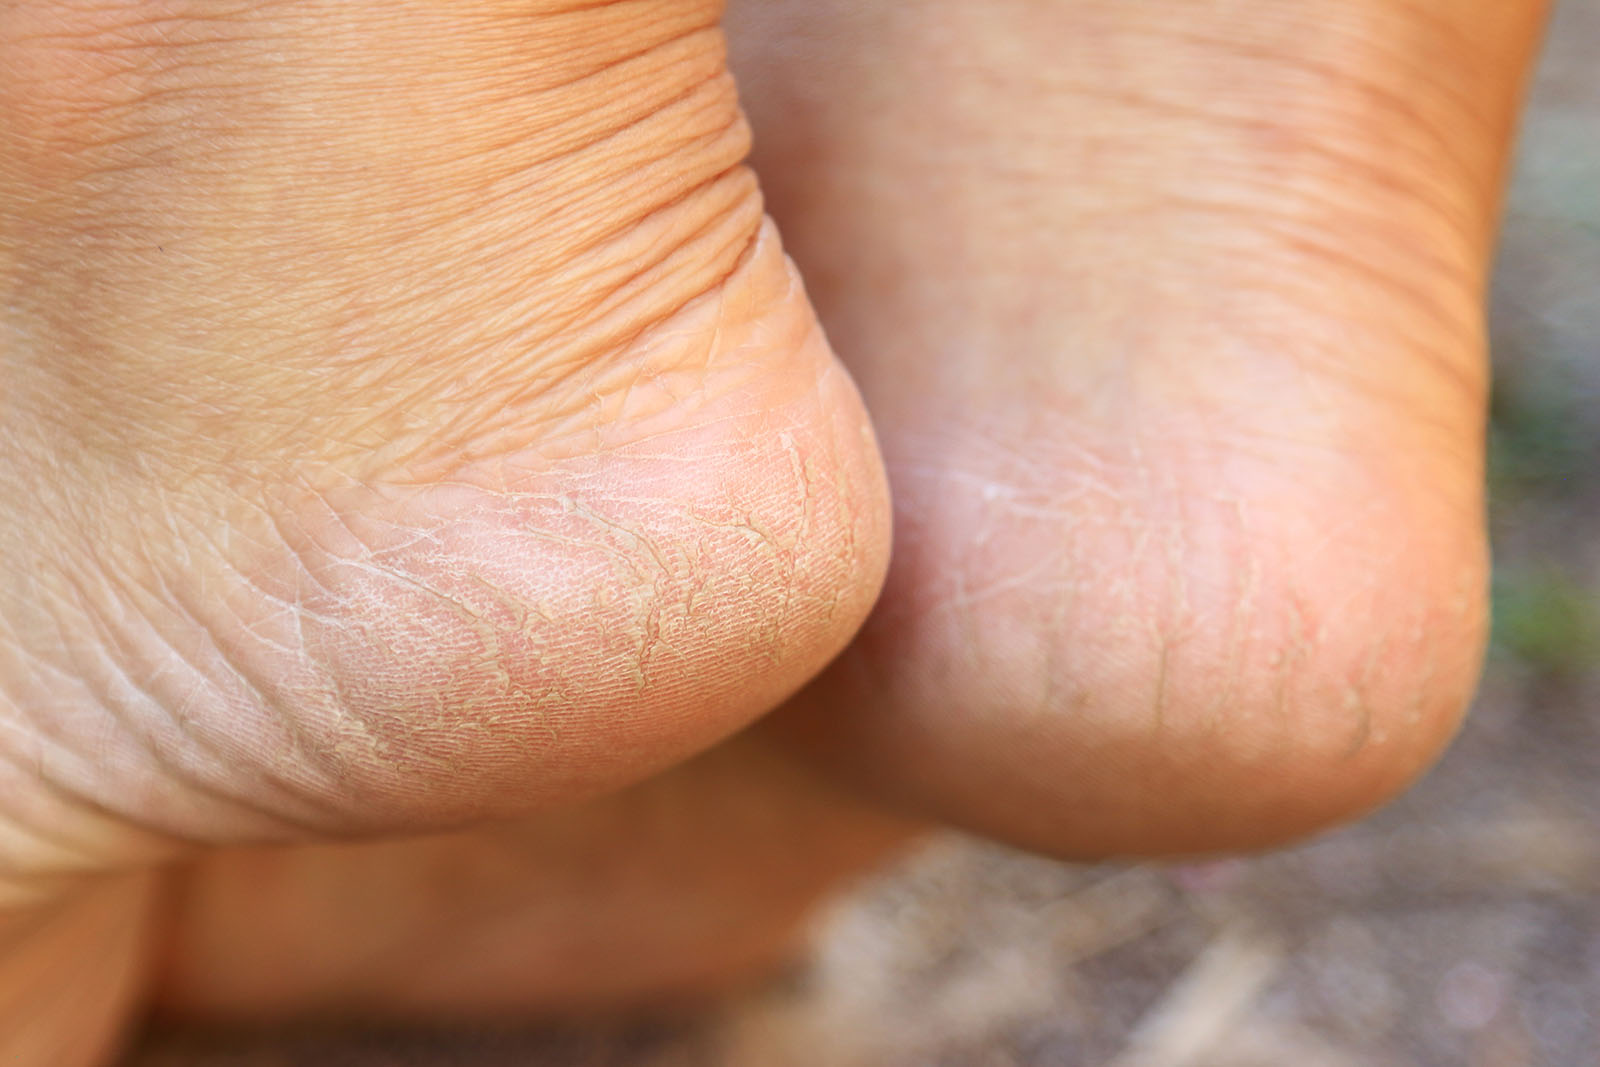 How to treat cracked heels with diabetes